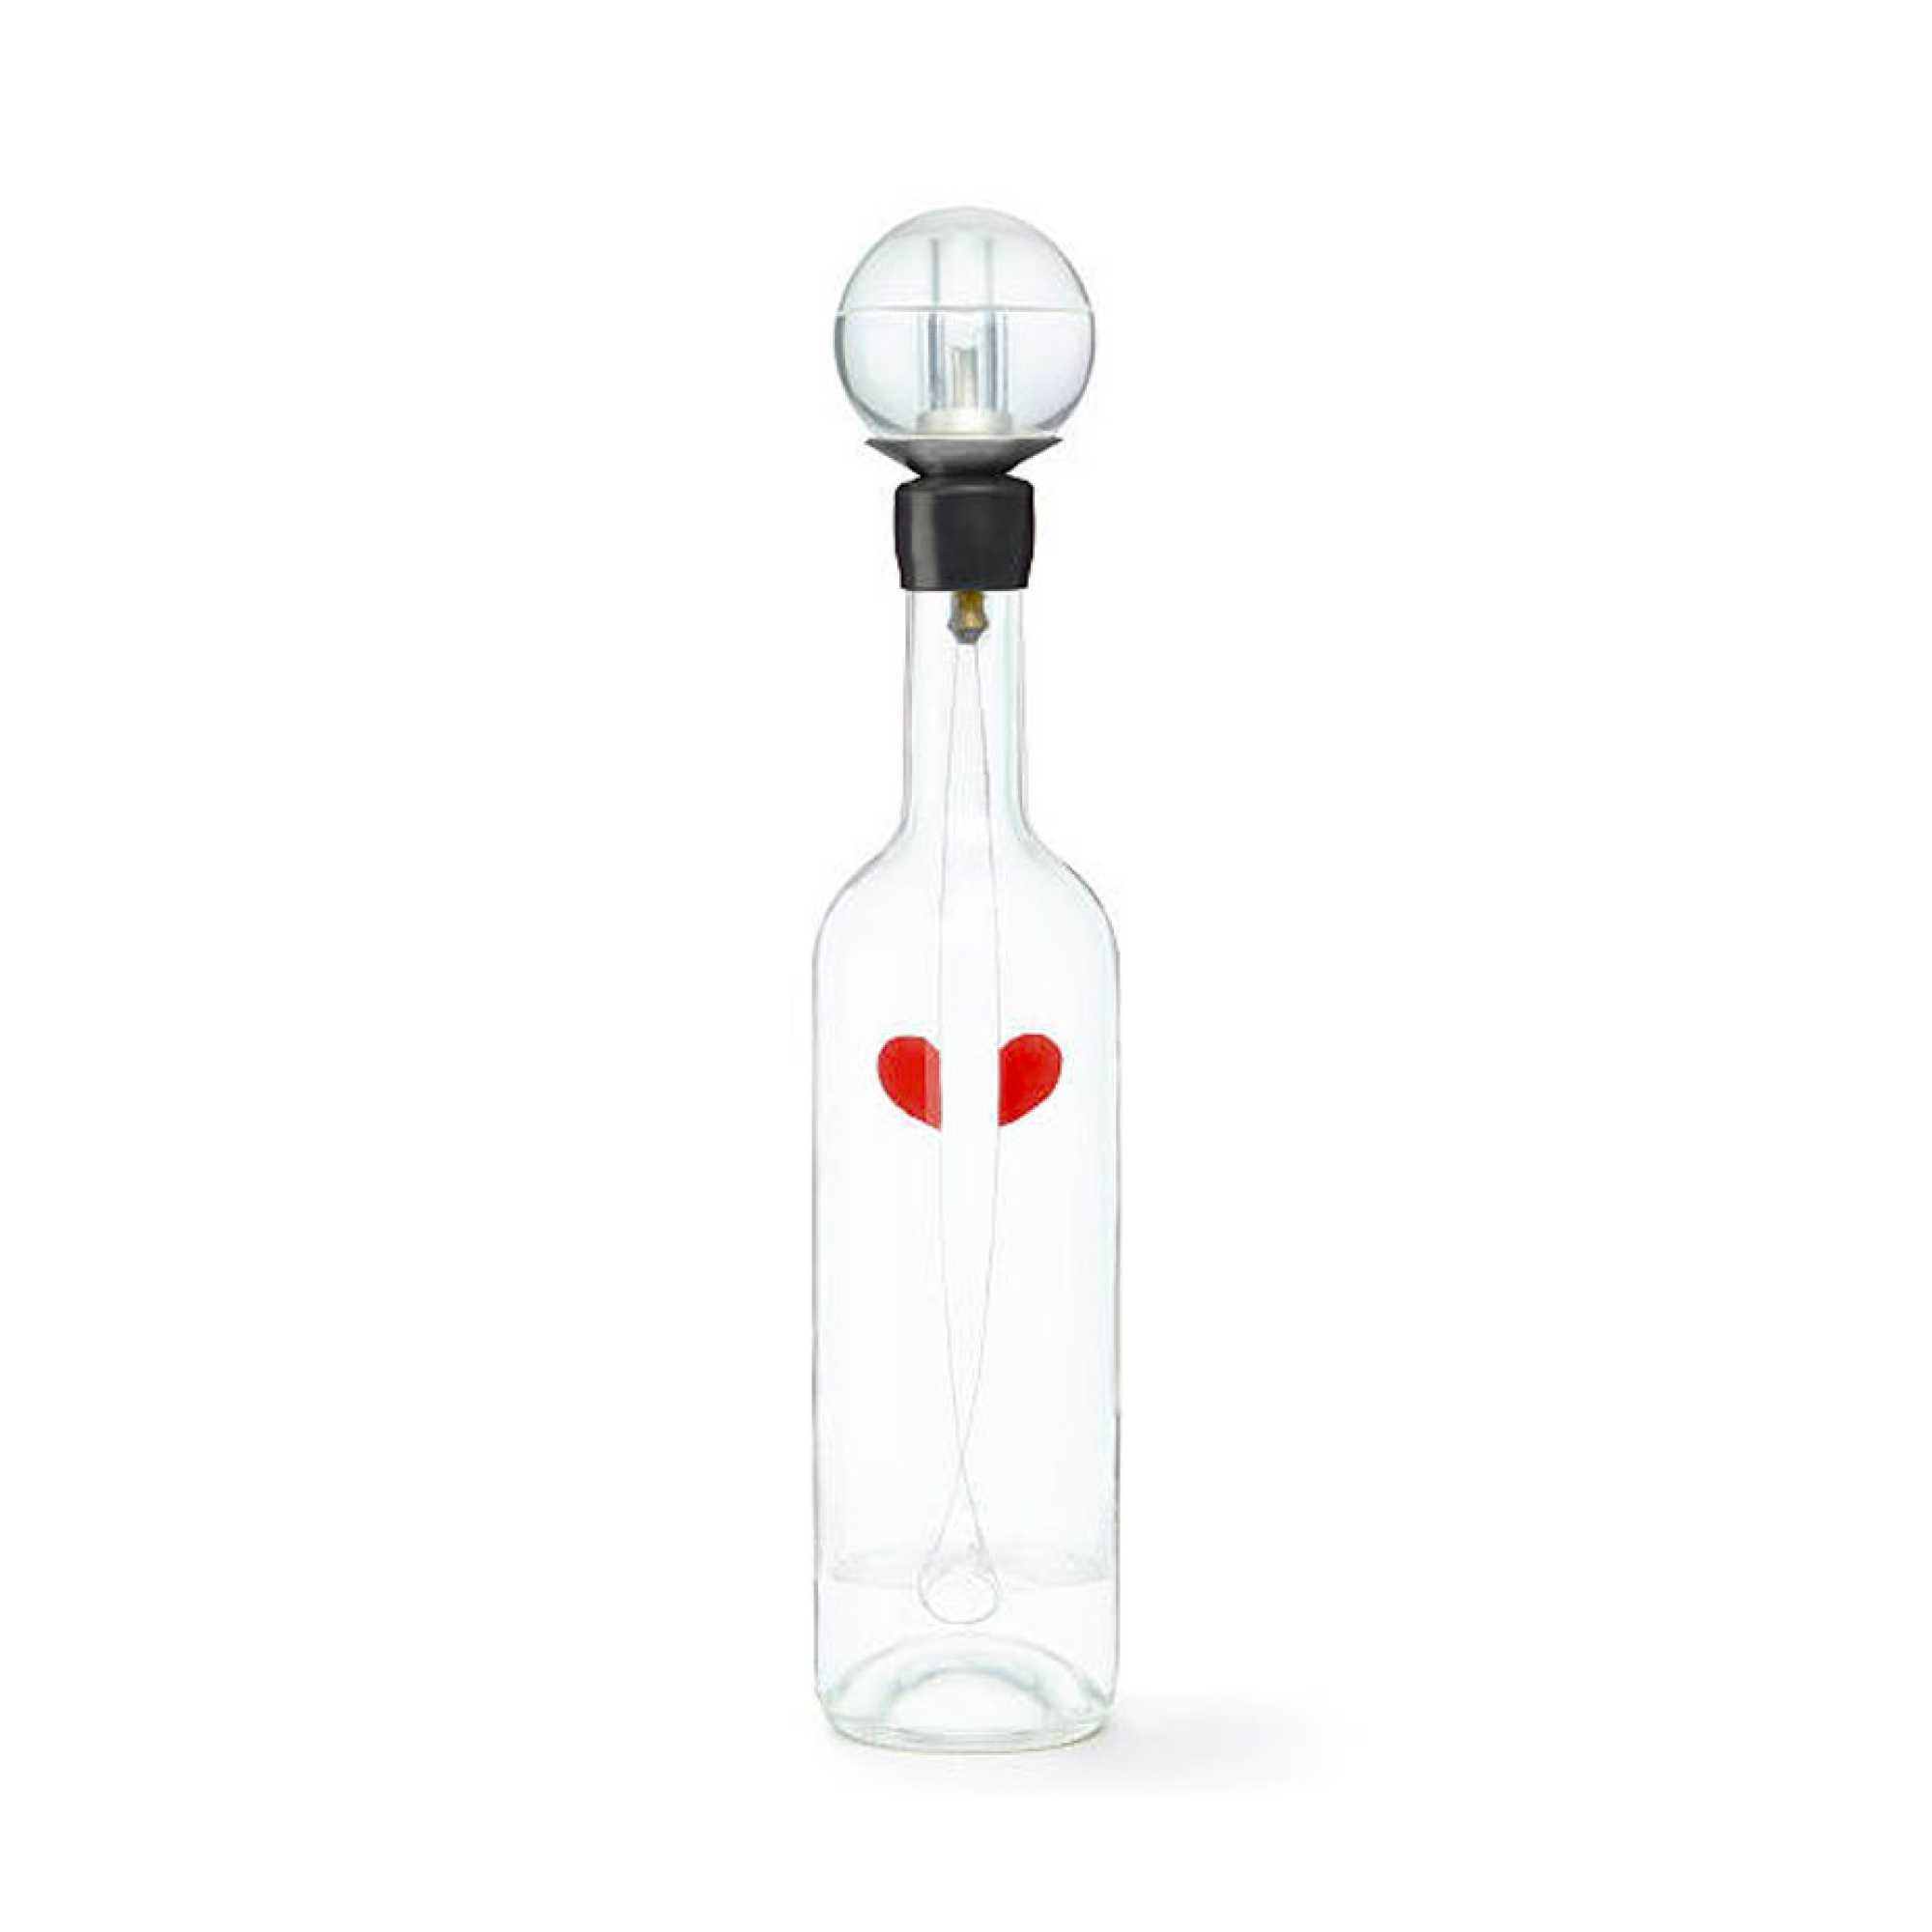 Philippe Bouveret's Beating Heart Bottle